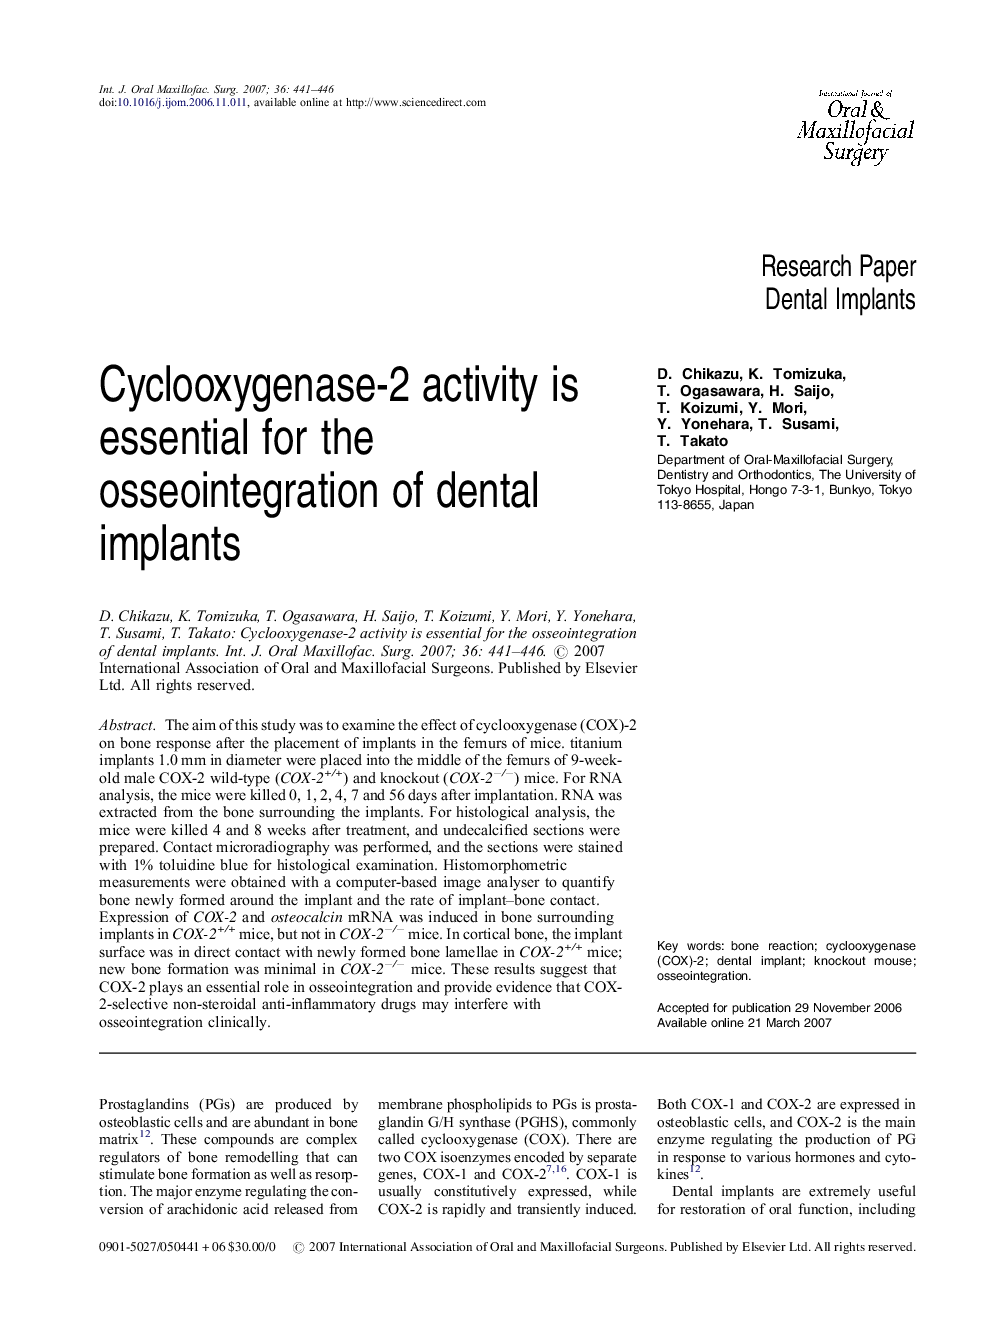 Cyclooxygenase-2 activity is essential for the osseointegration of dental implants